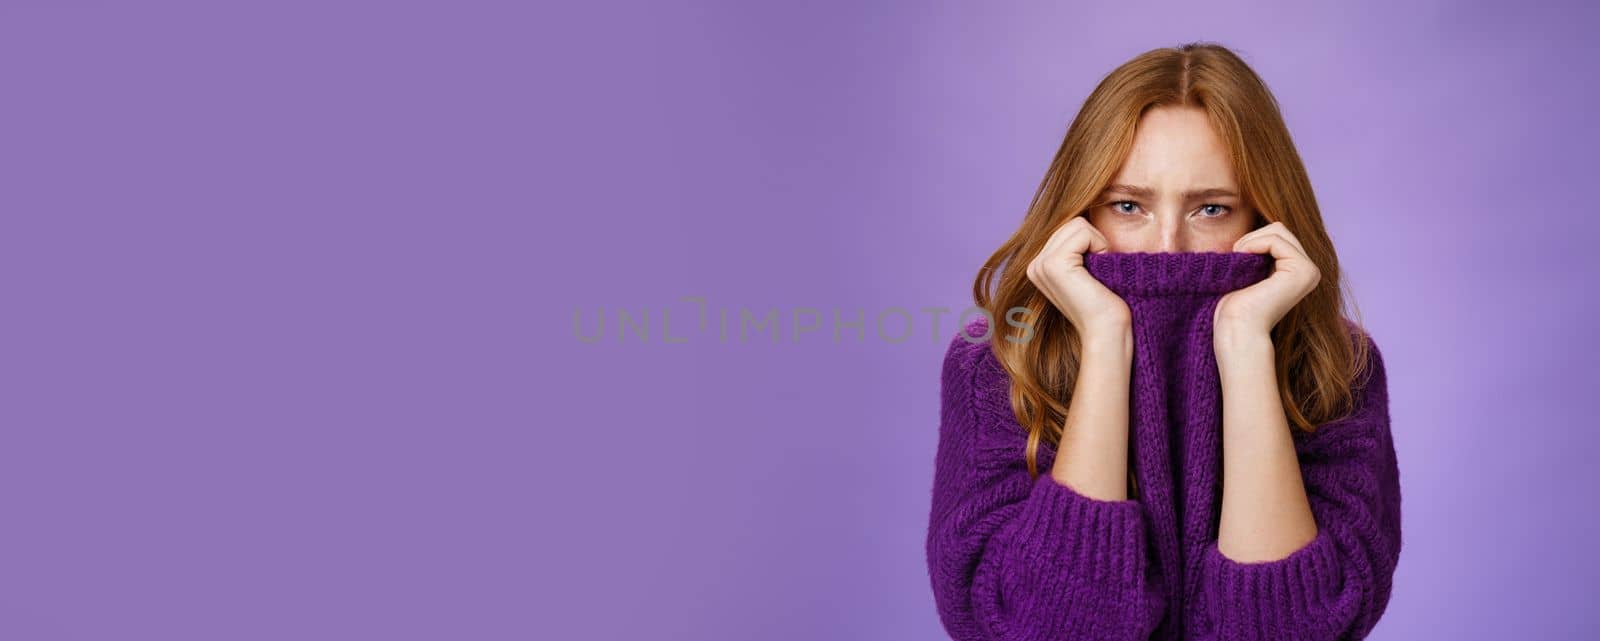 Gloomy upset redhead girlfriend pulling collar of purple sweater on nose, frowning and squinting offended, being aggrieved and resent, sulking moody and displeased over violet background by Benzoix